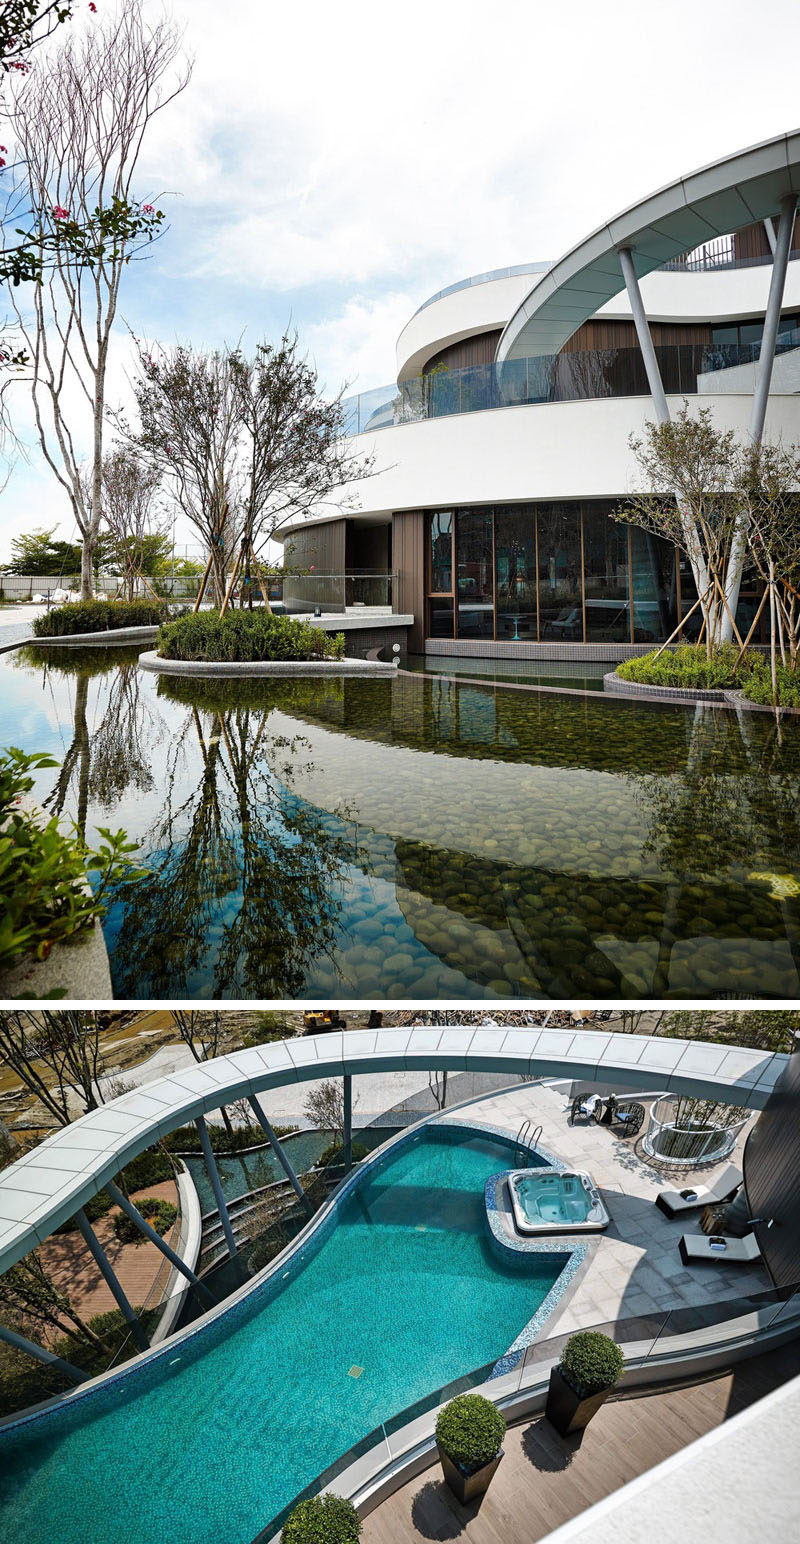 This clubhouse is surrounded by a landscaped pond, that can also be seen from the swimming pool, located on a different level of the building.